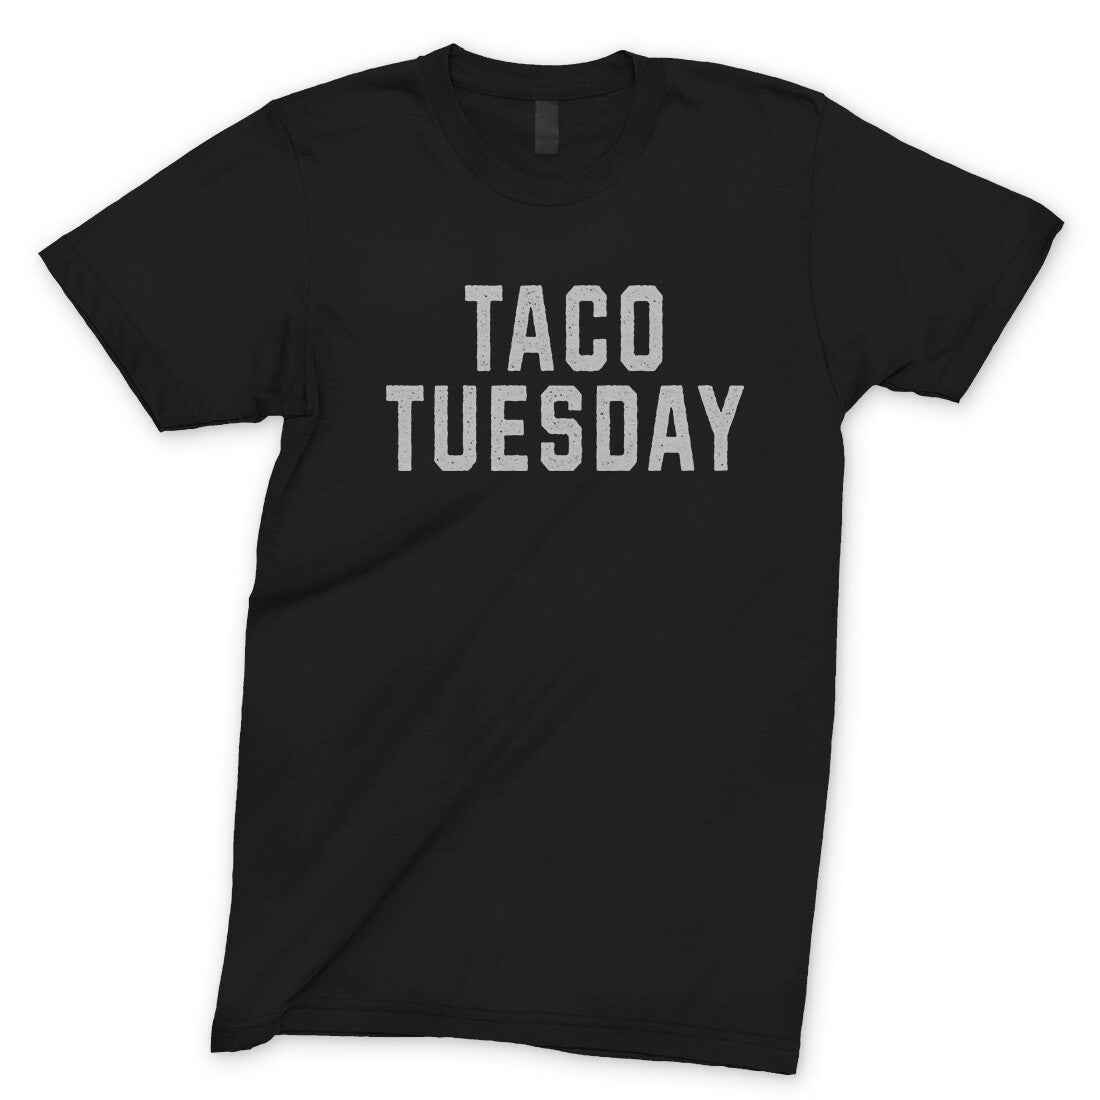 Taco Tuesday in Black Color